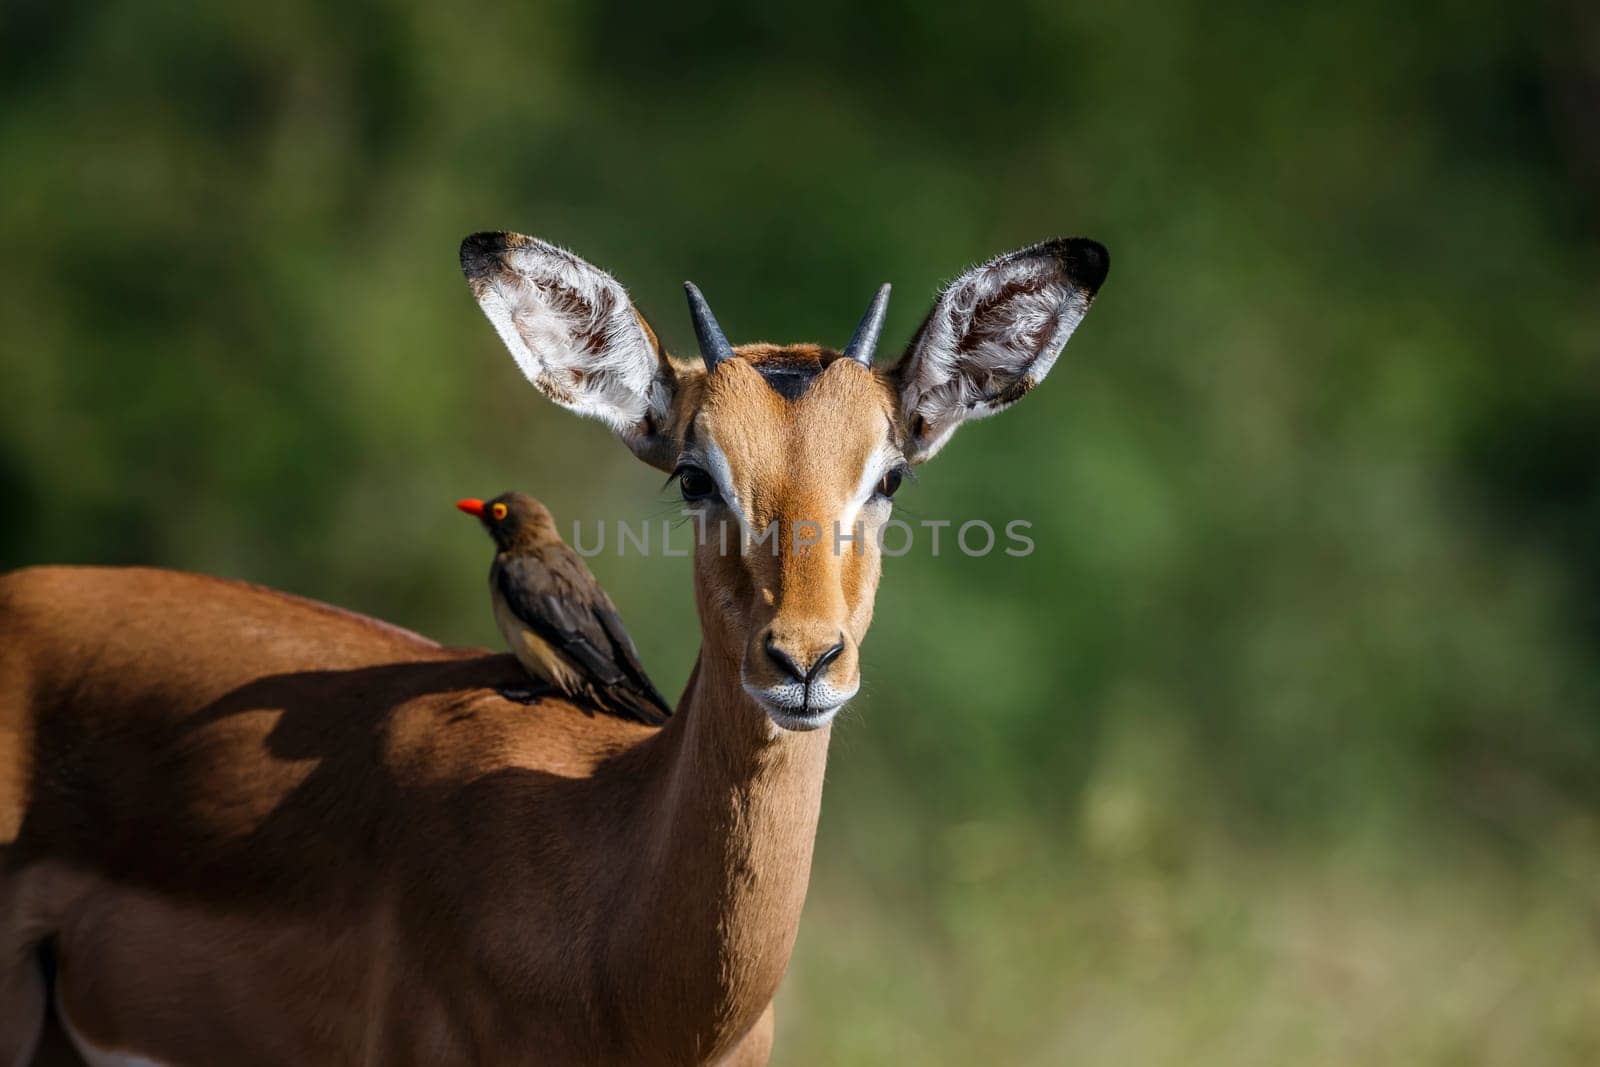 Common impala groomed by Red billed Oxpecker in Kruger National park, South Africa ; Specie Aepyceros melampus family of Bovidae and Specie Buphagus erythrorhynchus family of Buphagidae